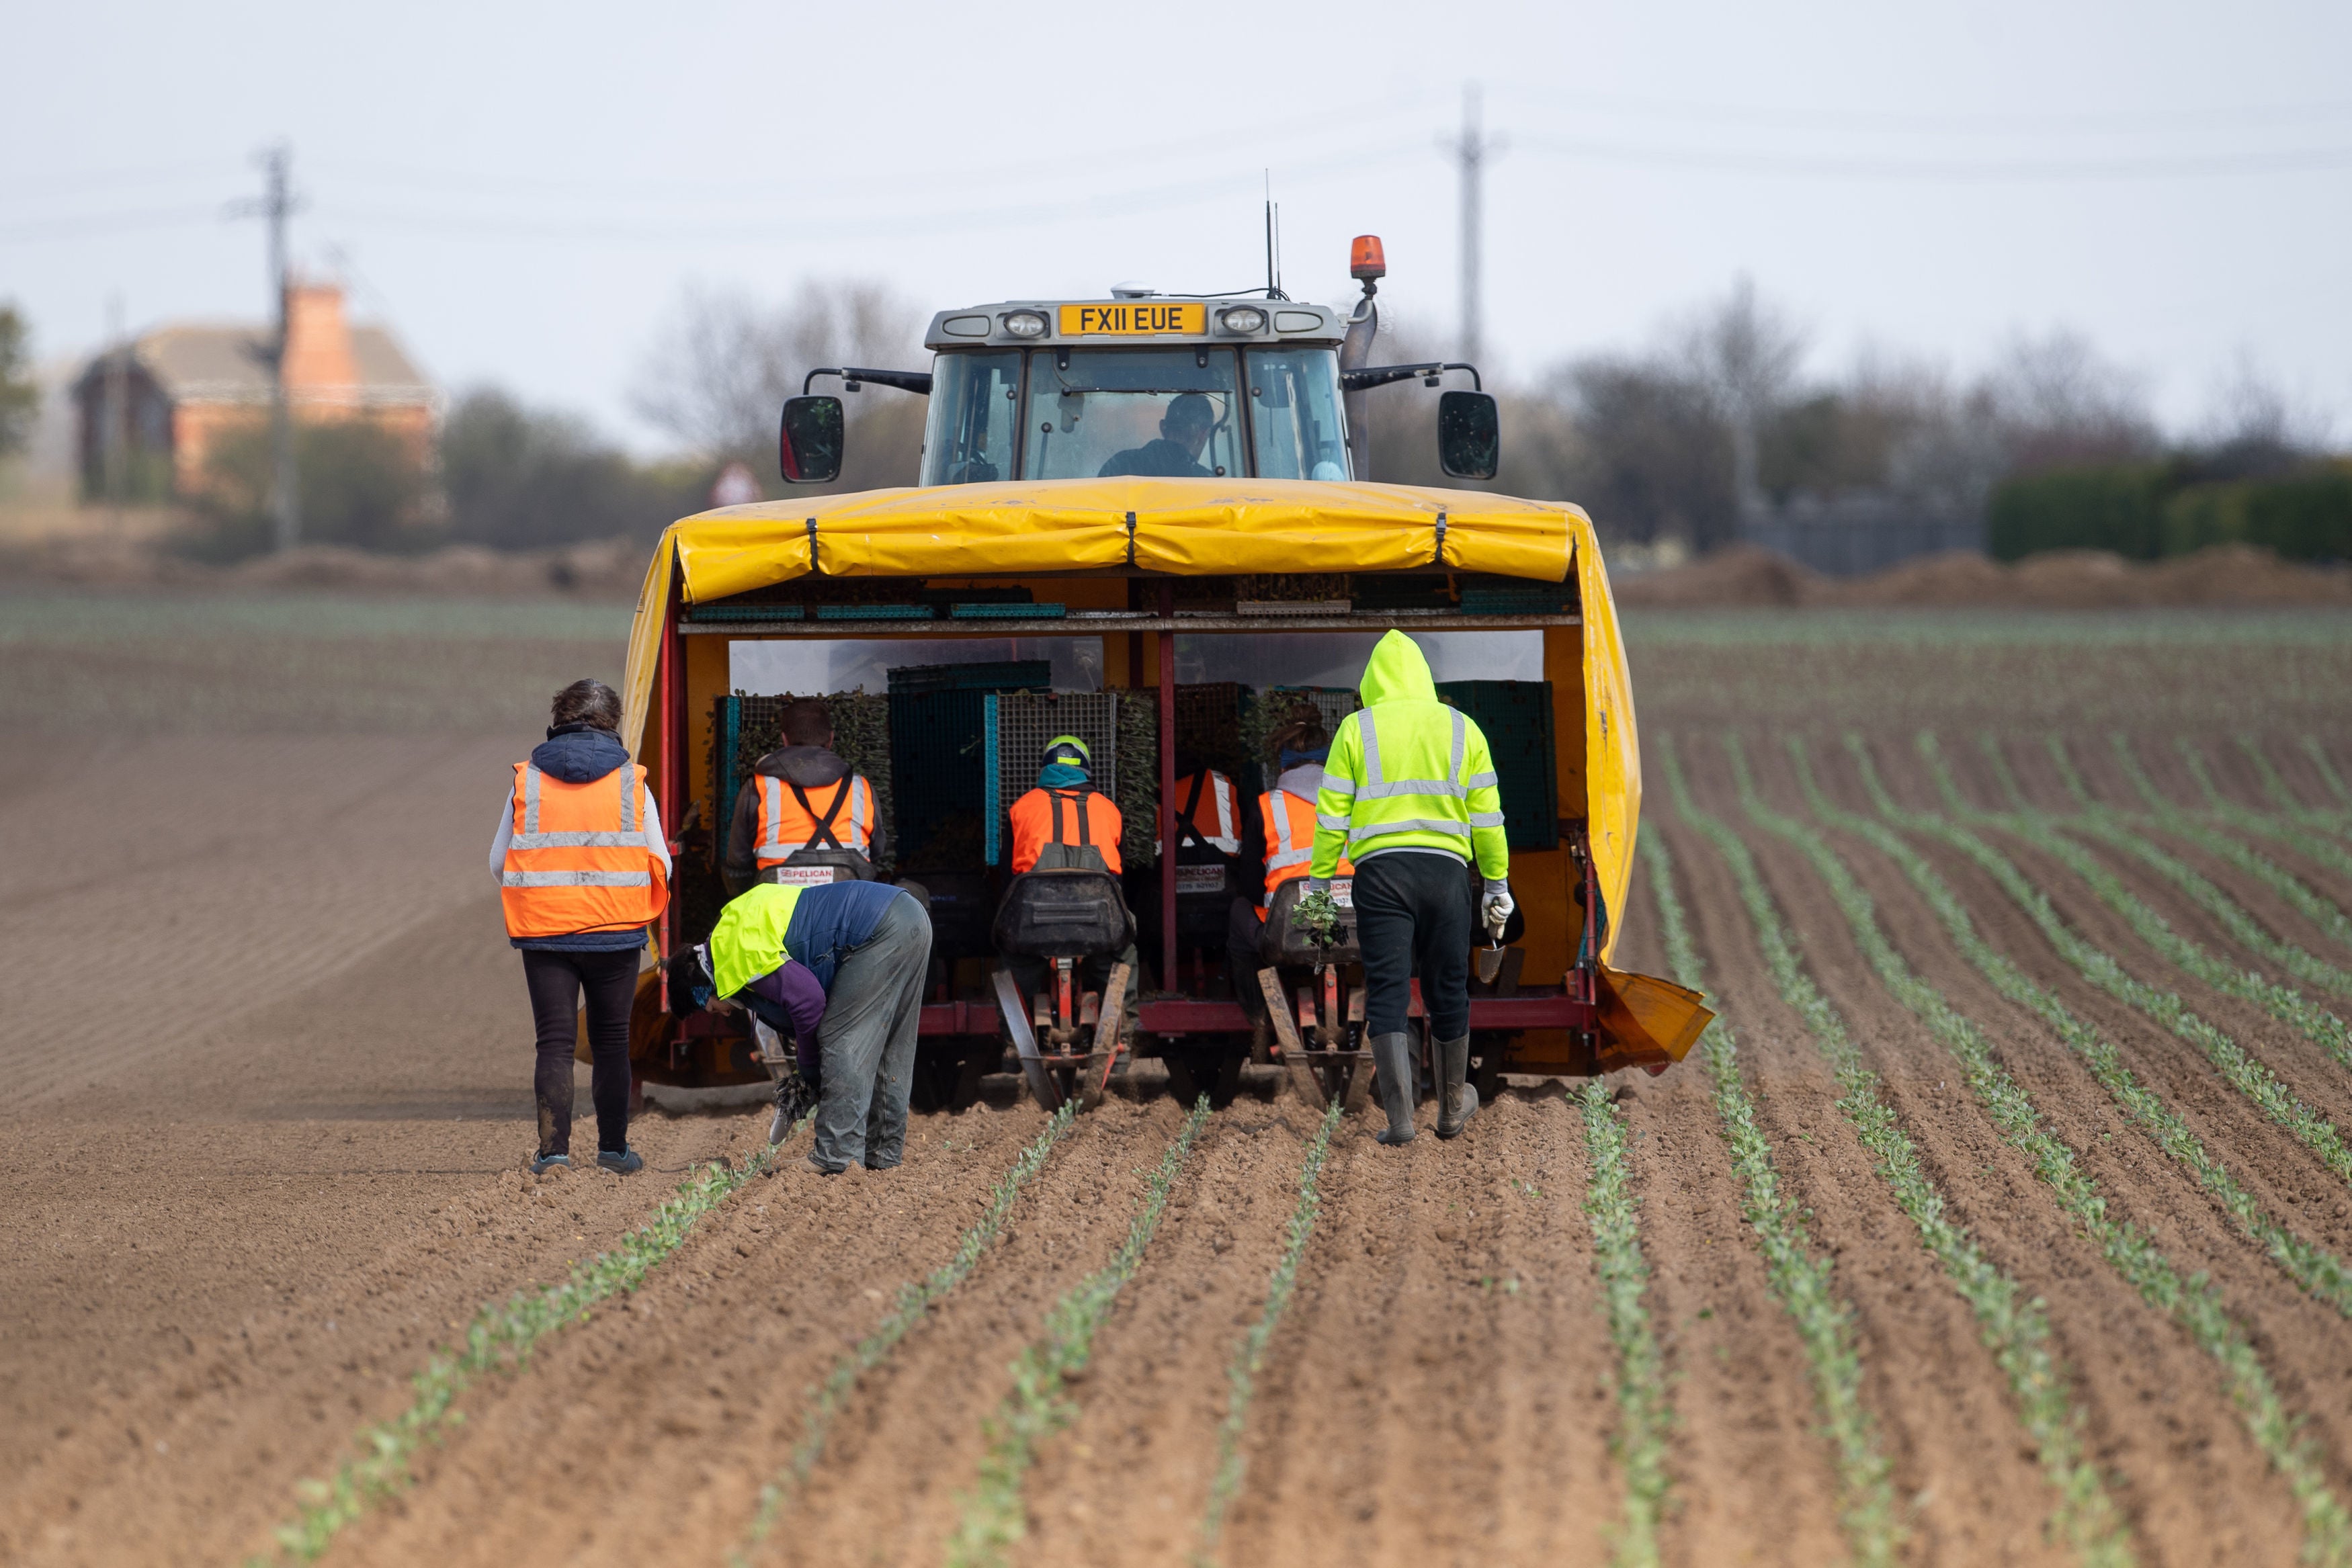 In the absence of a sudden desire among the British population to return to the land, increasing domestic horticultural production will require an influx of migrant workers